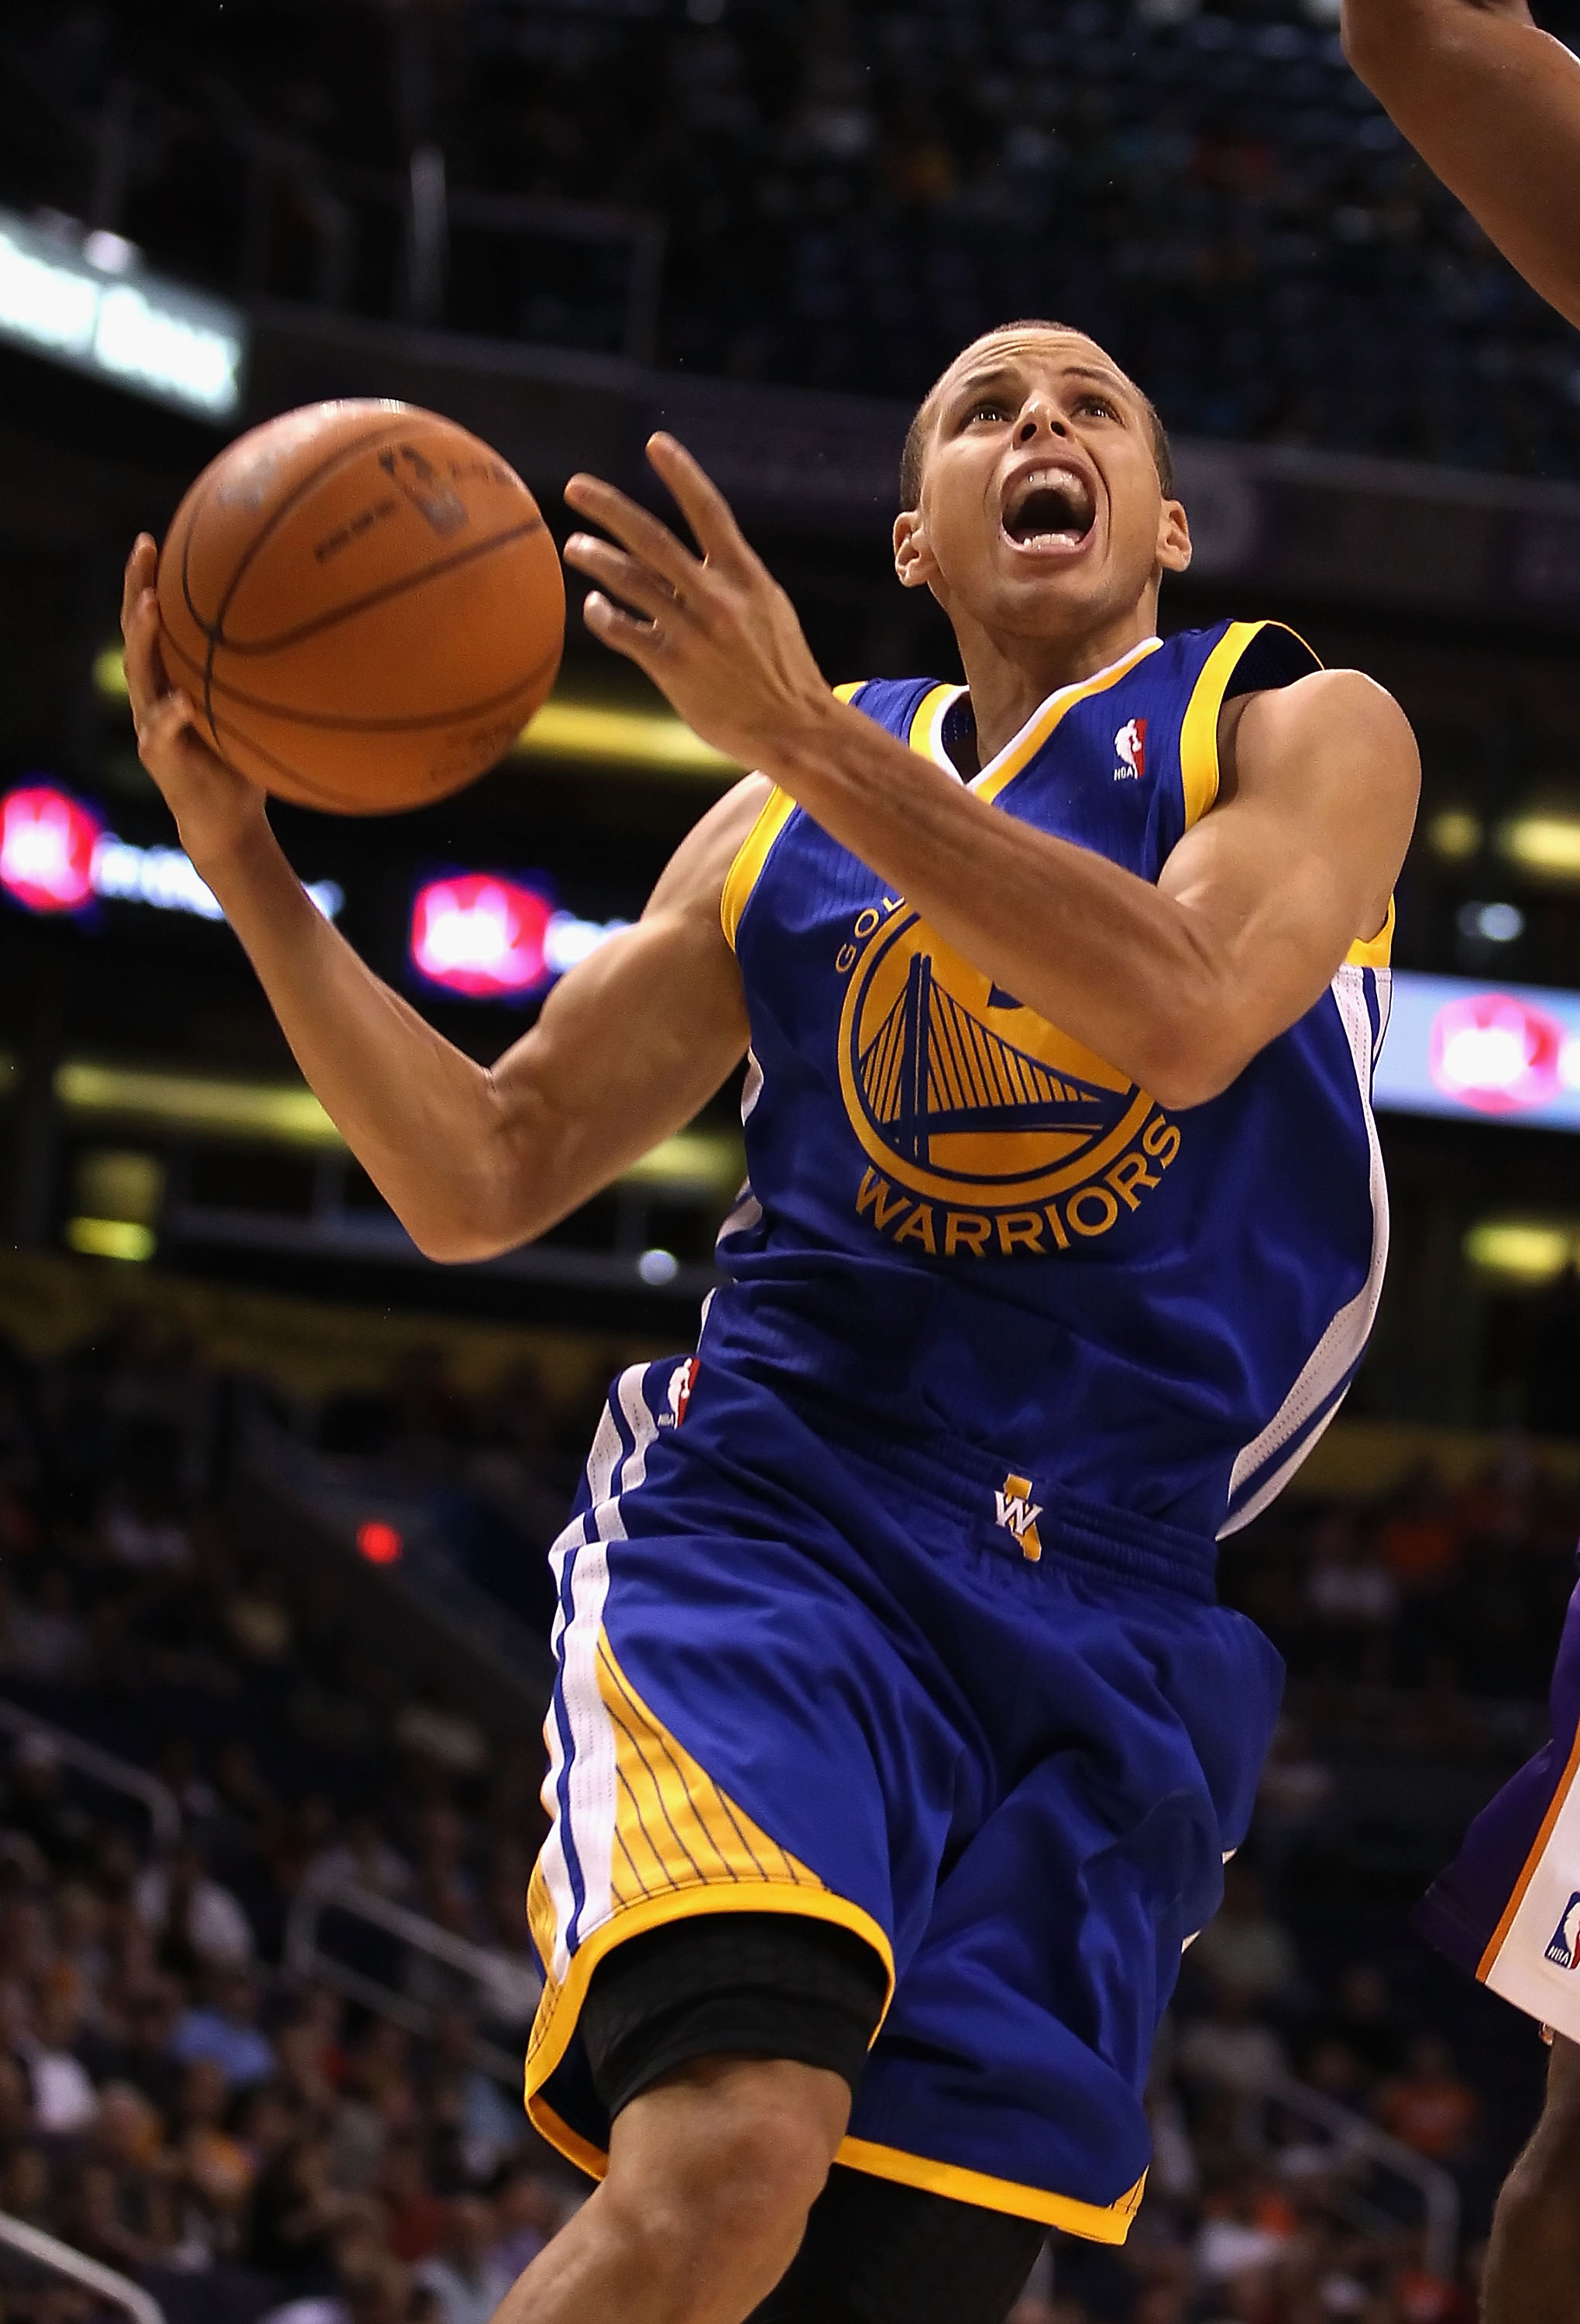 PHOENIX - OCTOBER 19:  Stephen Curry #30 of the Golden State Warriors drives to the basket during the preseason NBA game against the Phoenix Suns at US Airways Center on October 19, 2010 in Phoenix, Arizona. NOTE TO USER: User expressly acknowledges and a